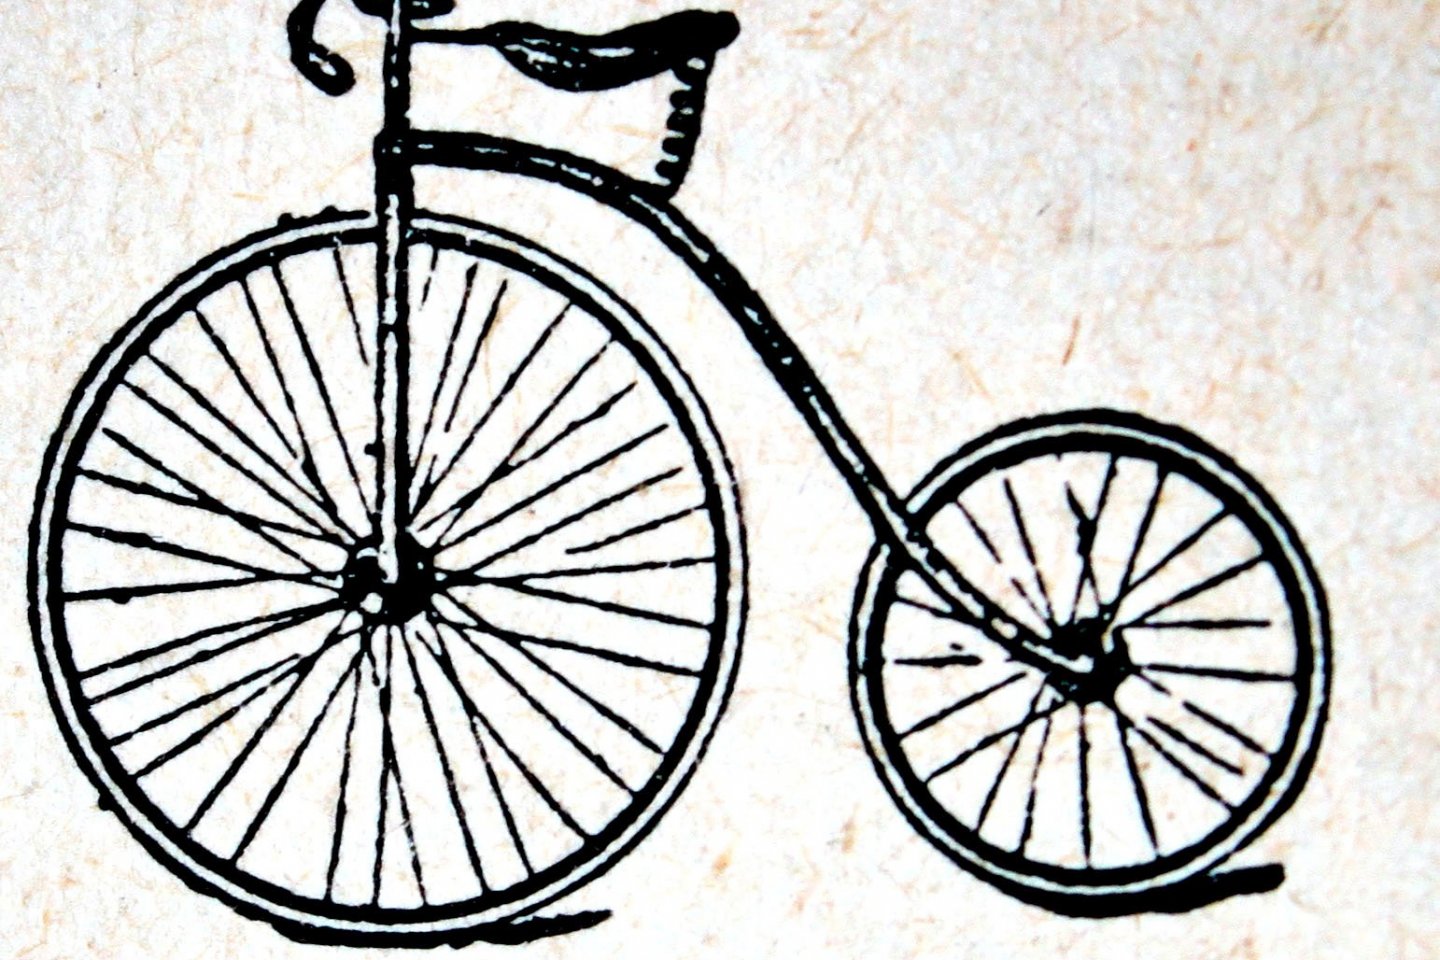 Bicycles have inspired a great deal of art over time